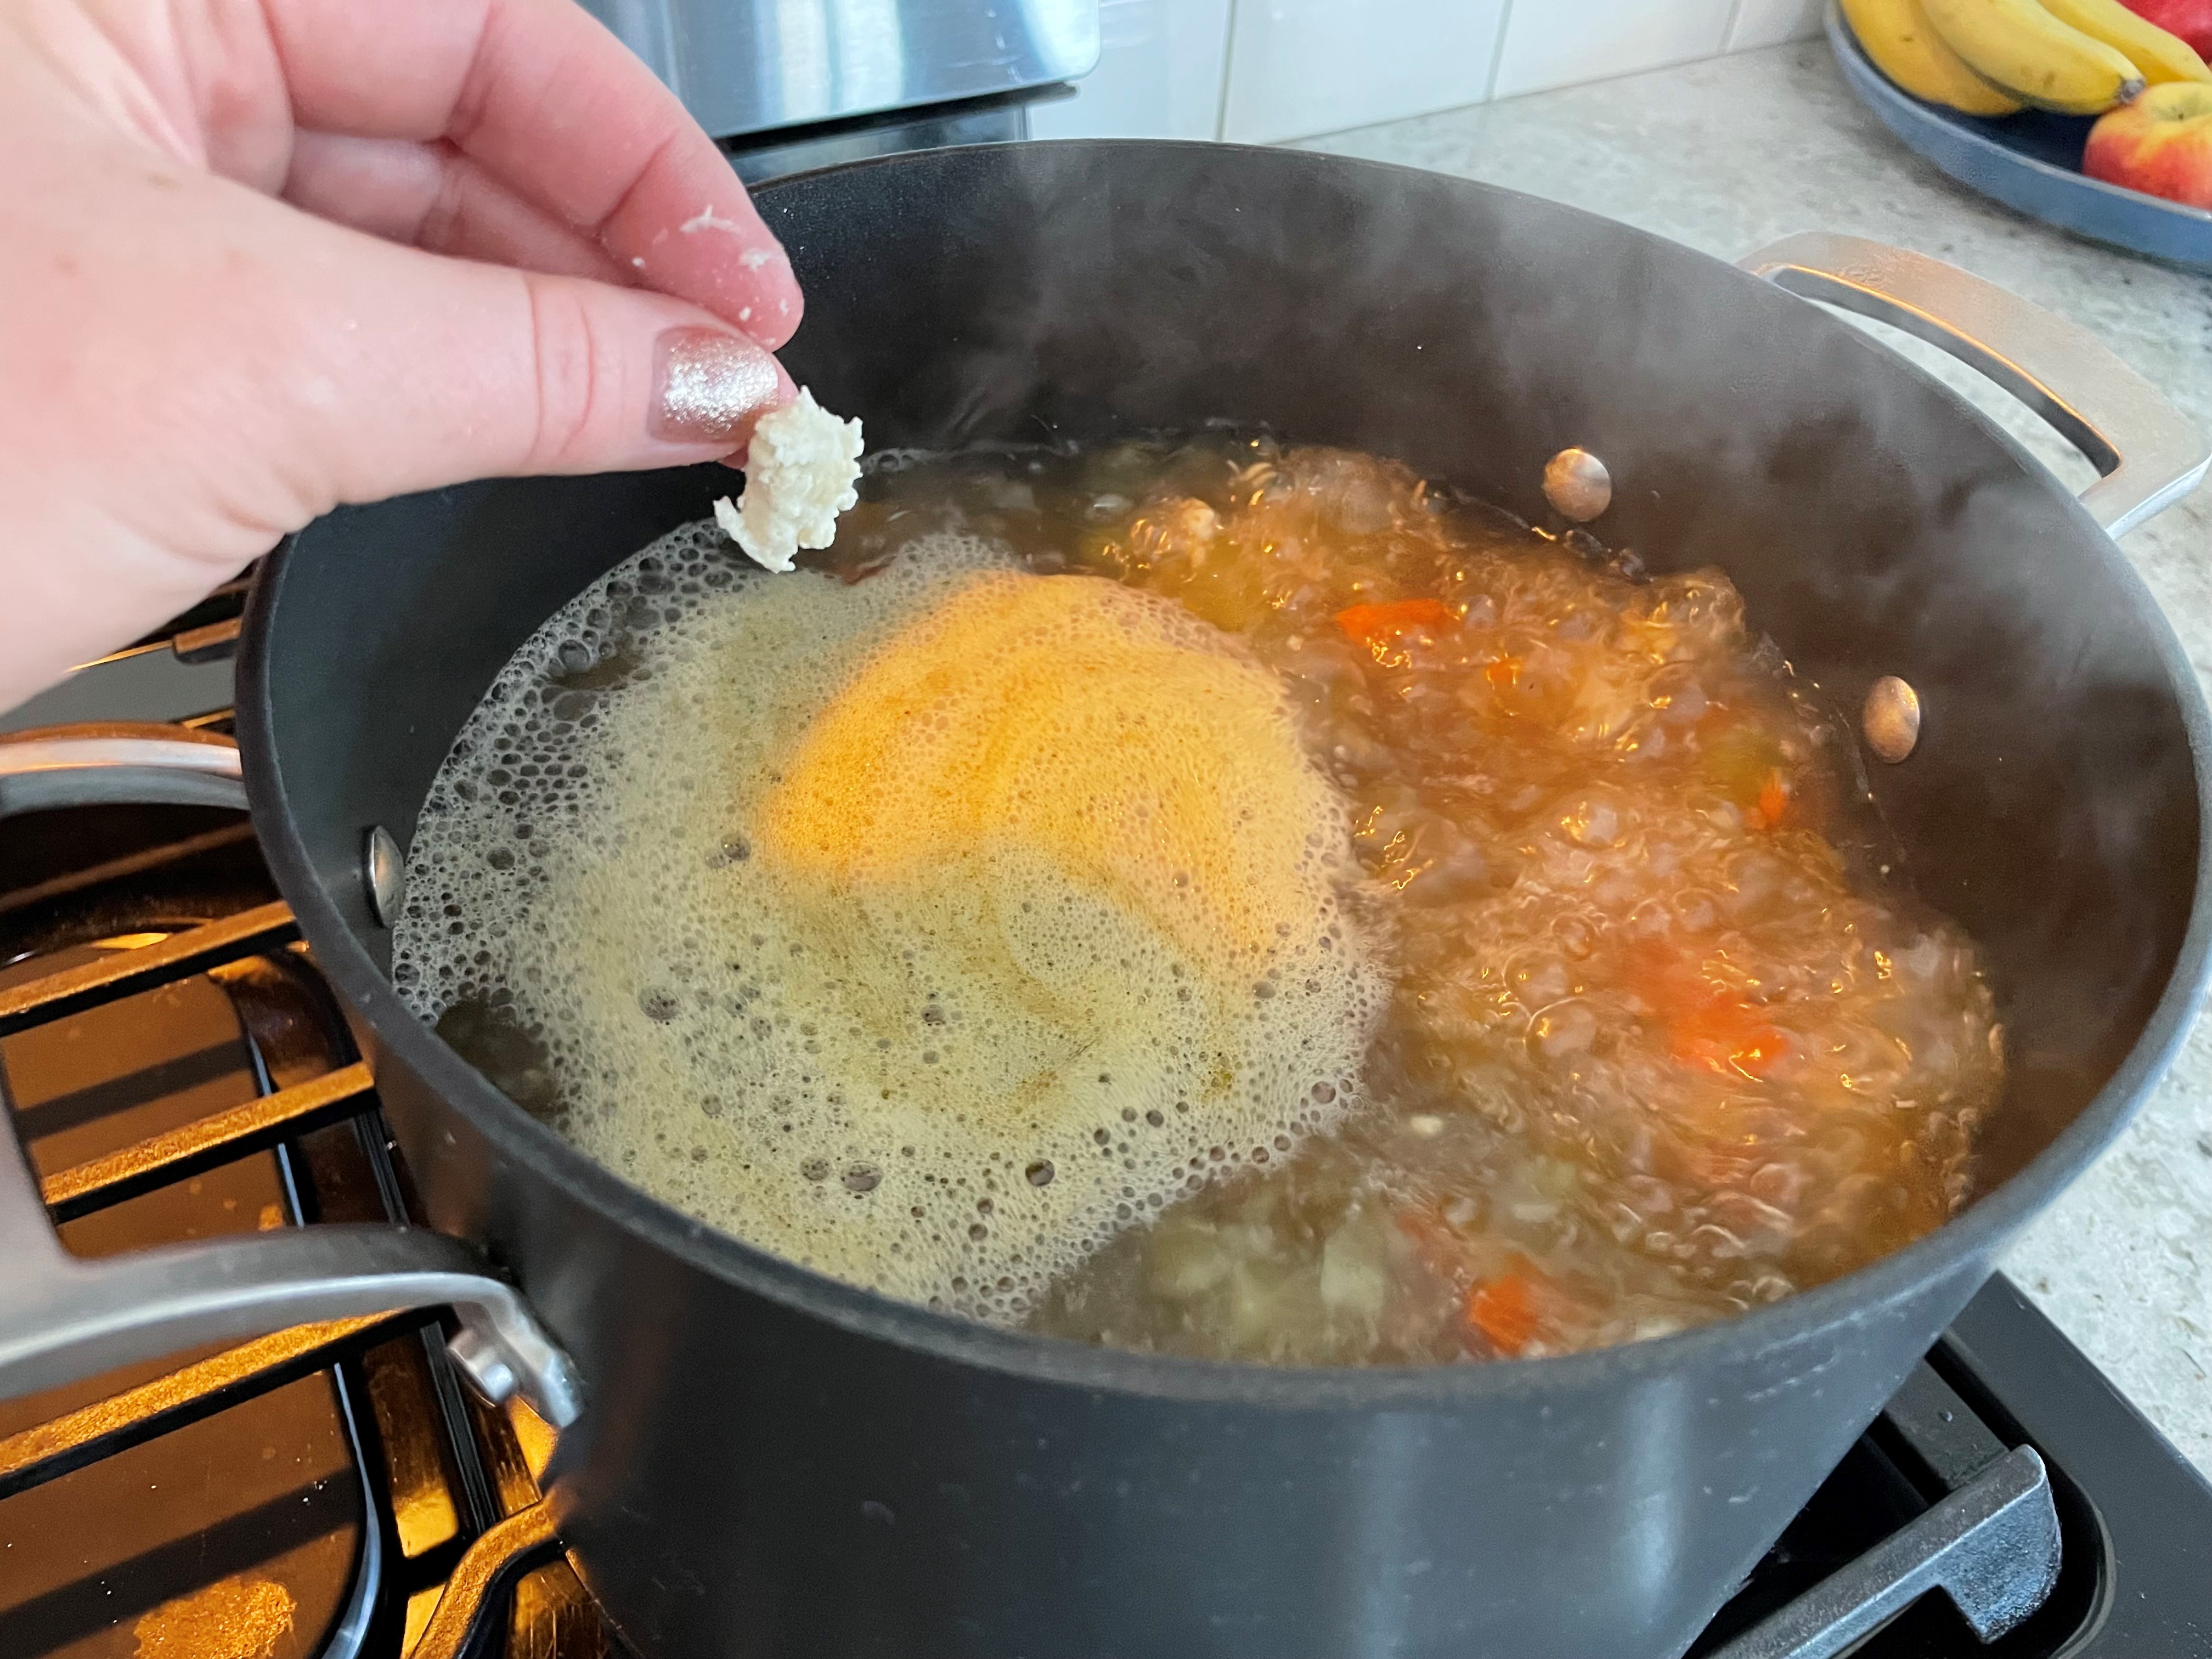 marble sized dough ball pinched in fingers over boiling soup